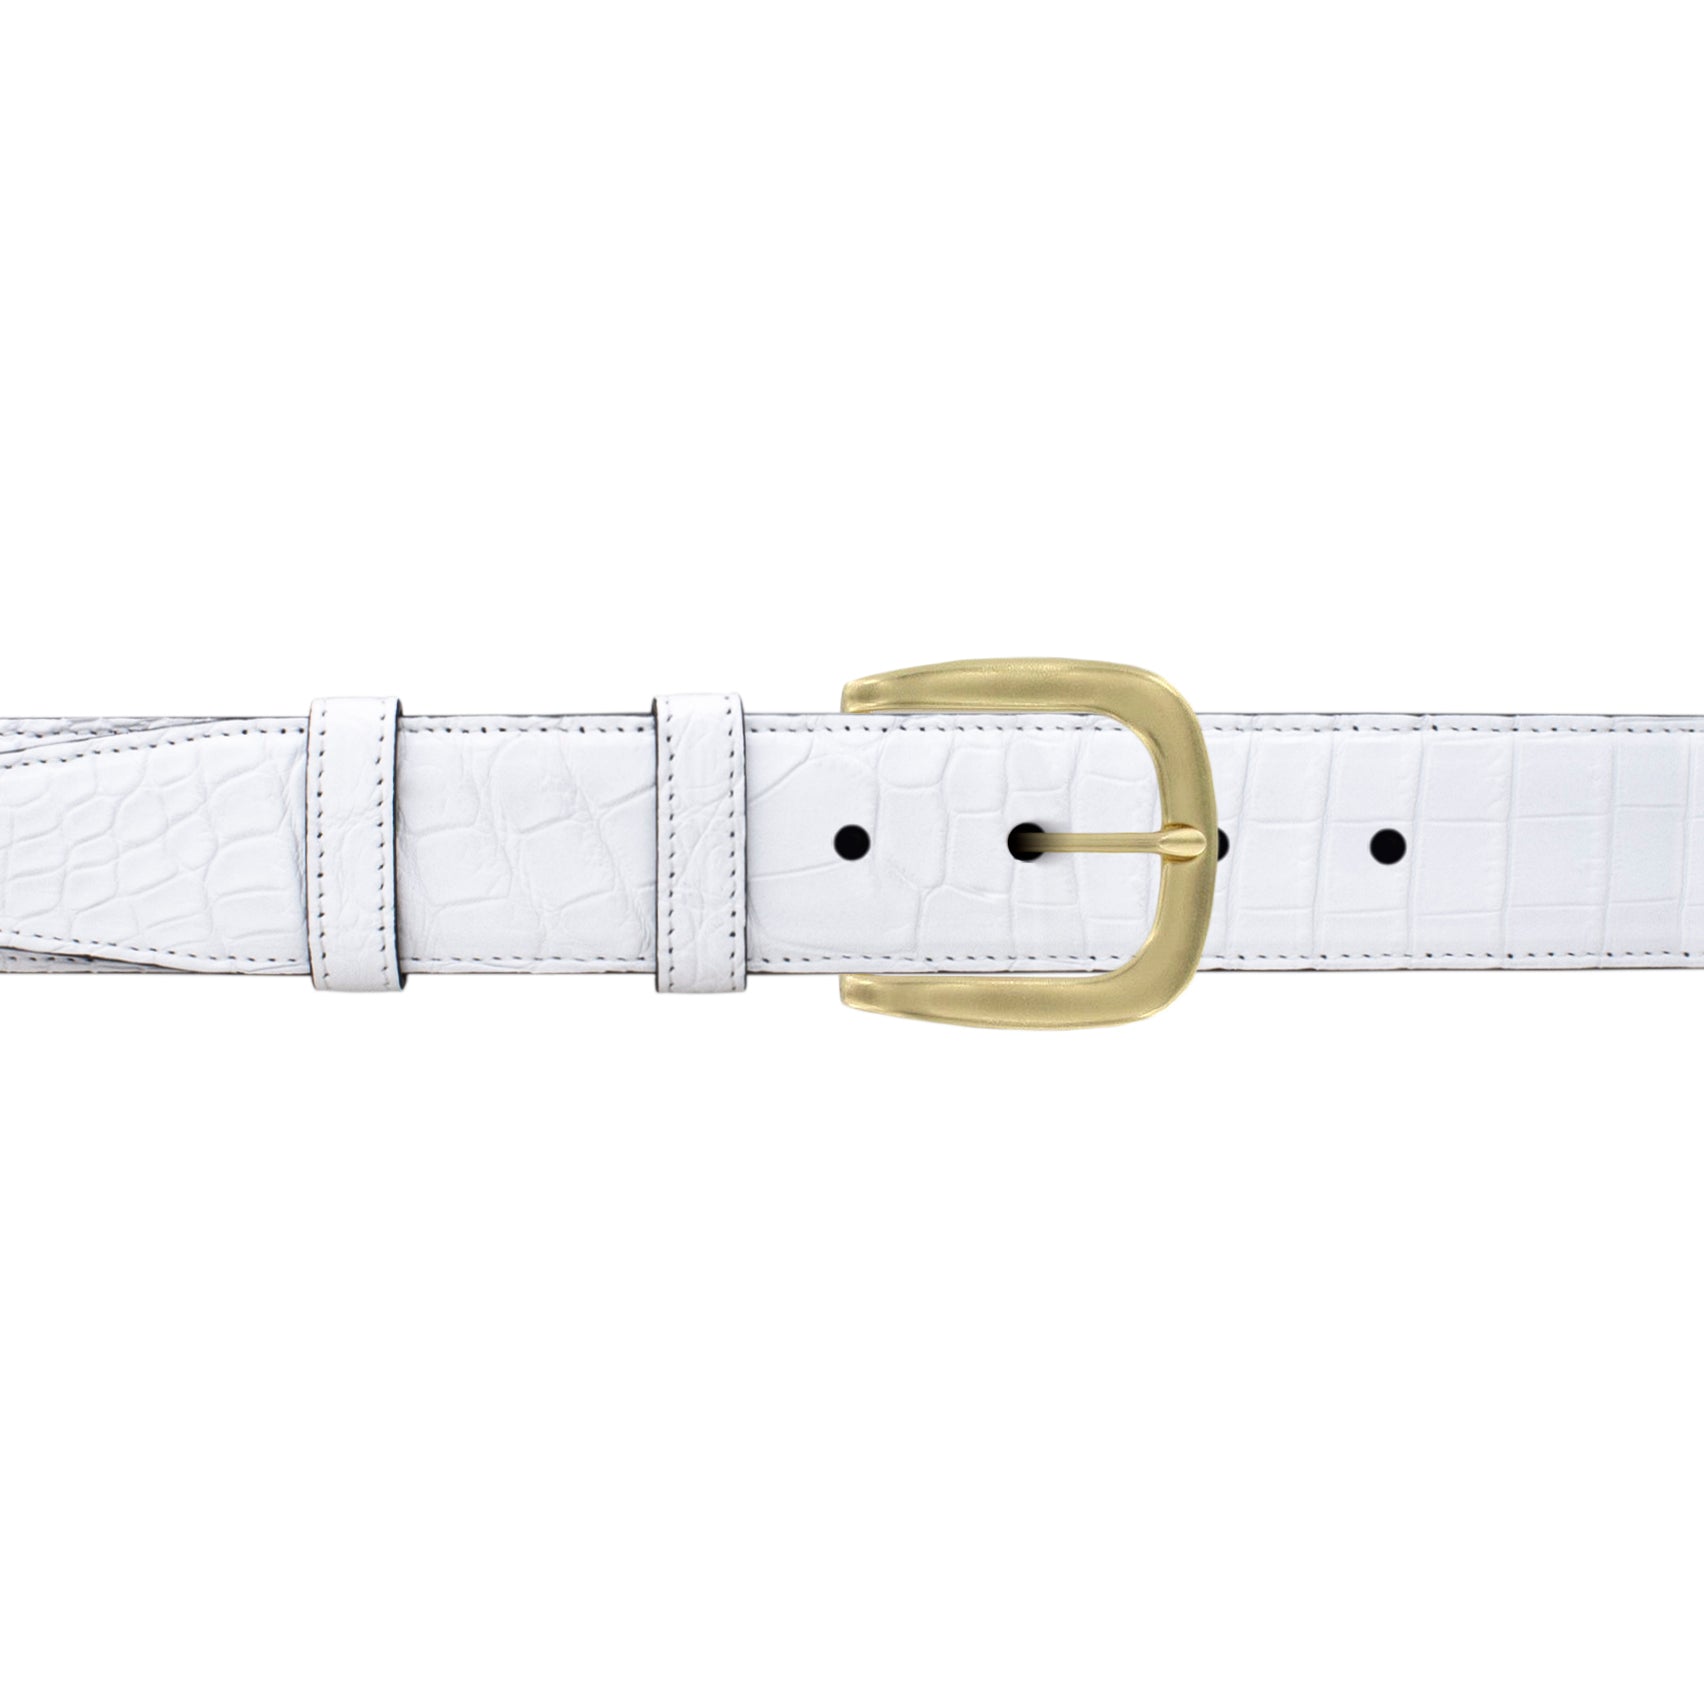 1 1/2" White Classic Belt with Oxford Cocktail Buckle in Brass